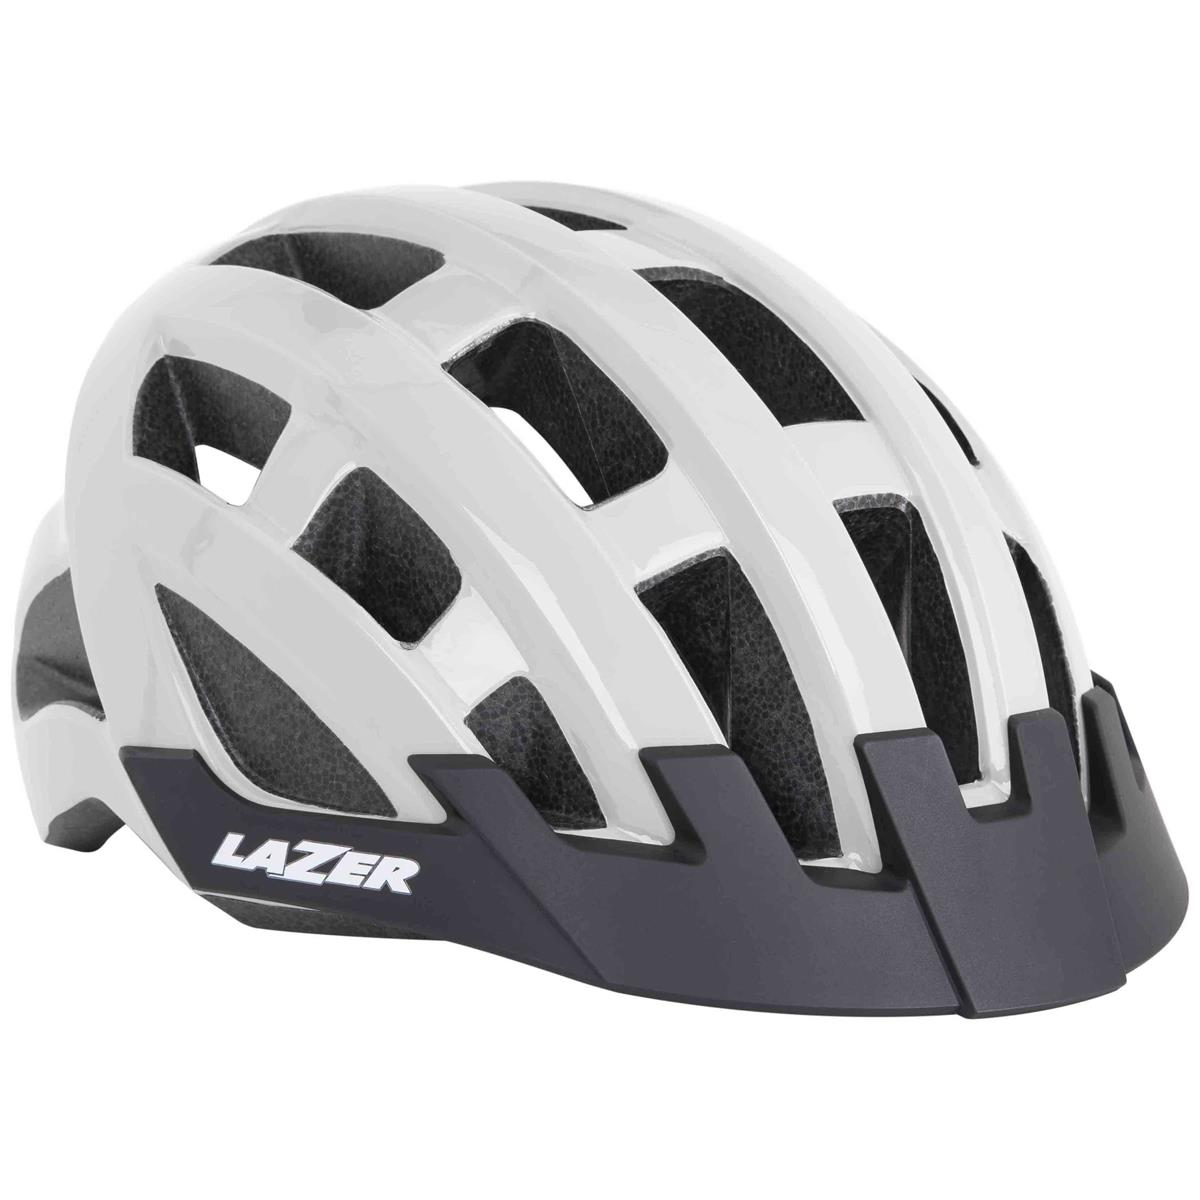 Helmet compact white one size (54-61)